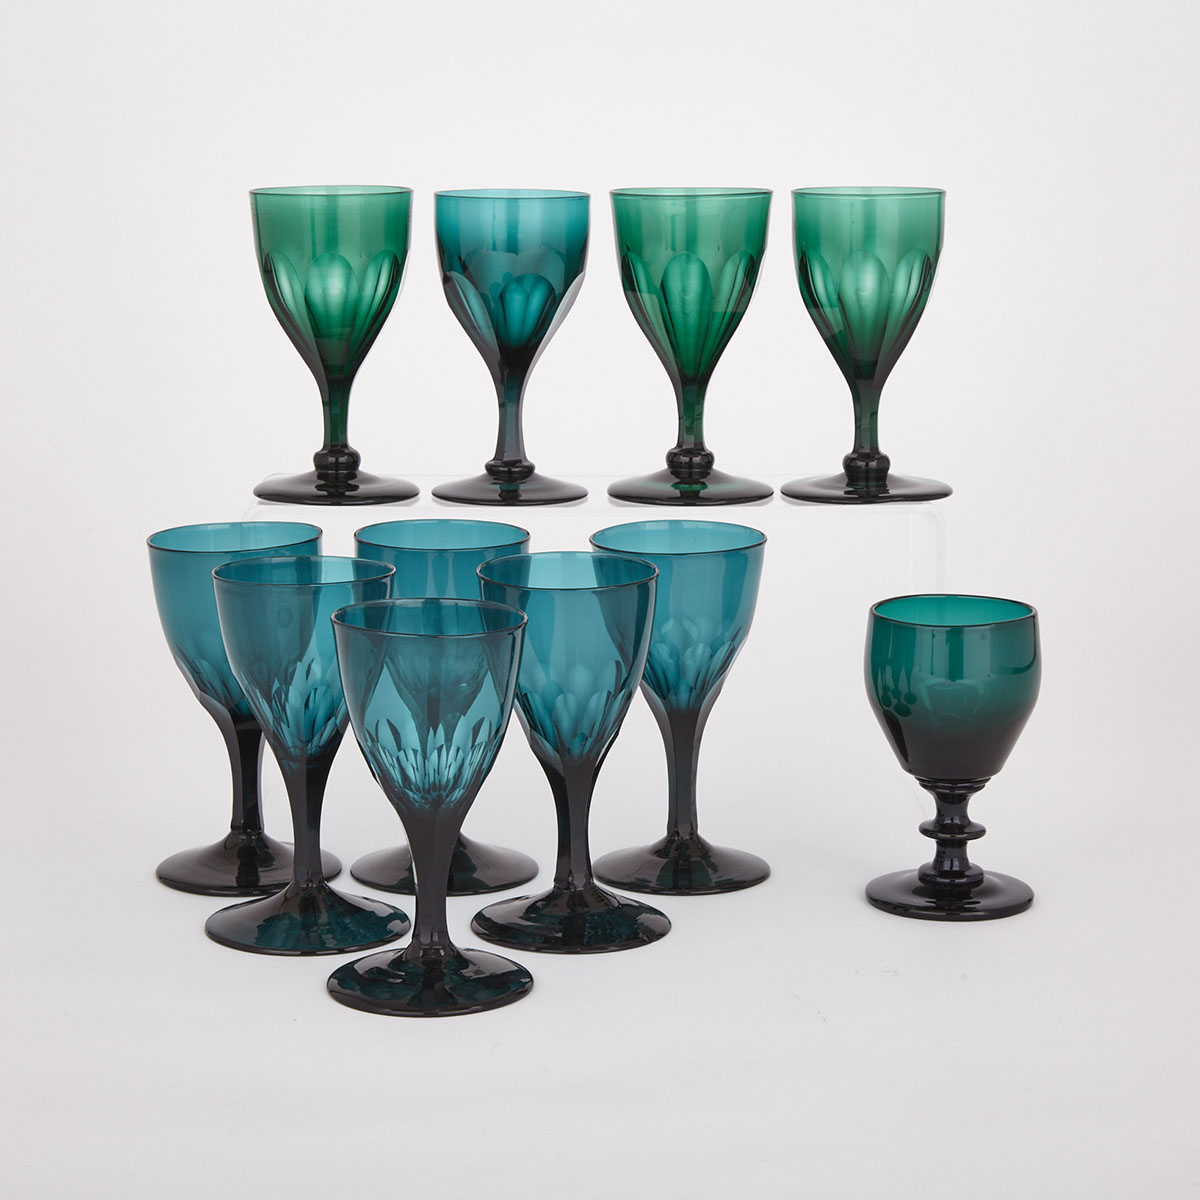 Eleven Various Green Glass Wines, 19th/20th century